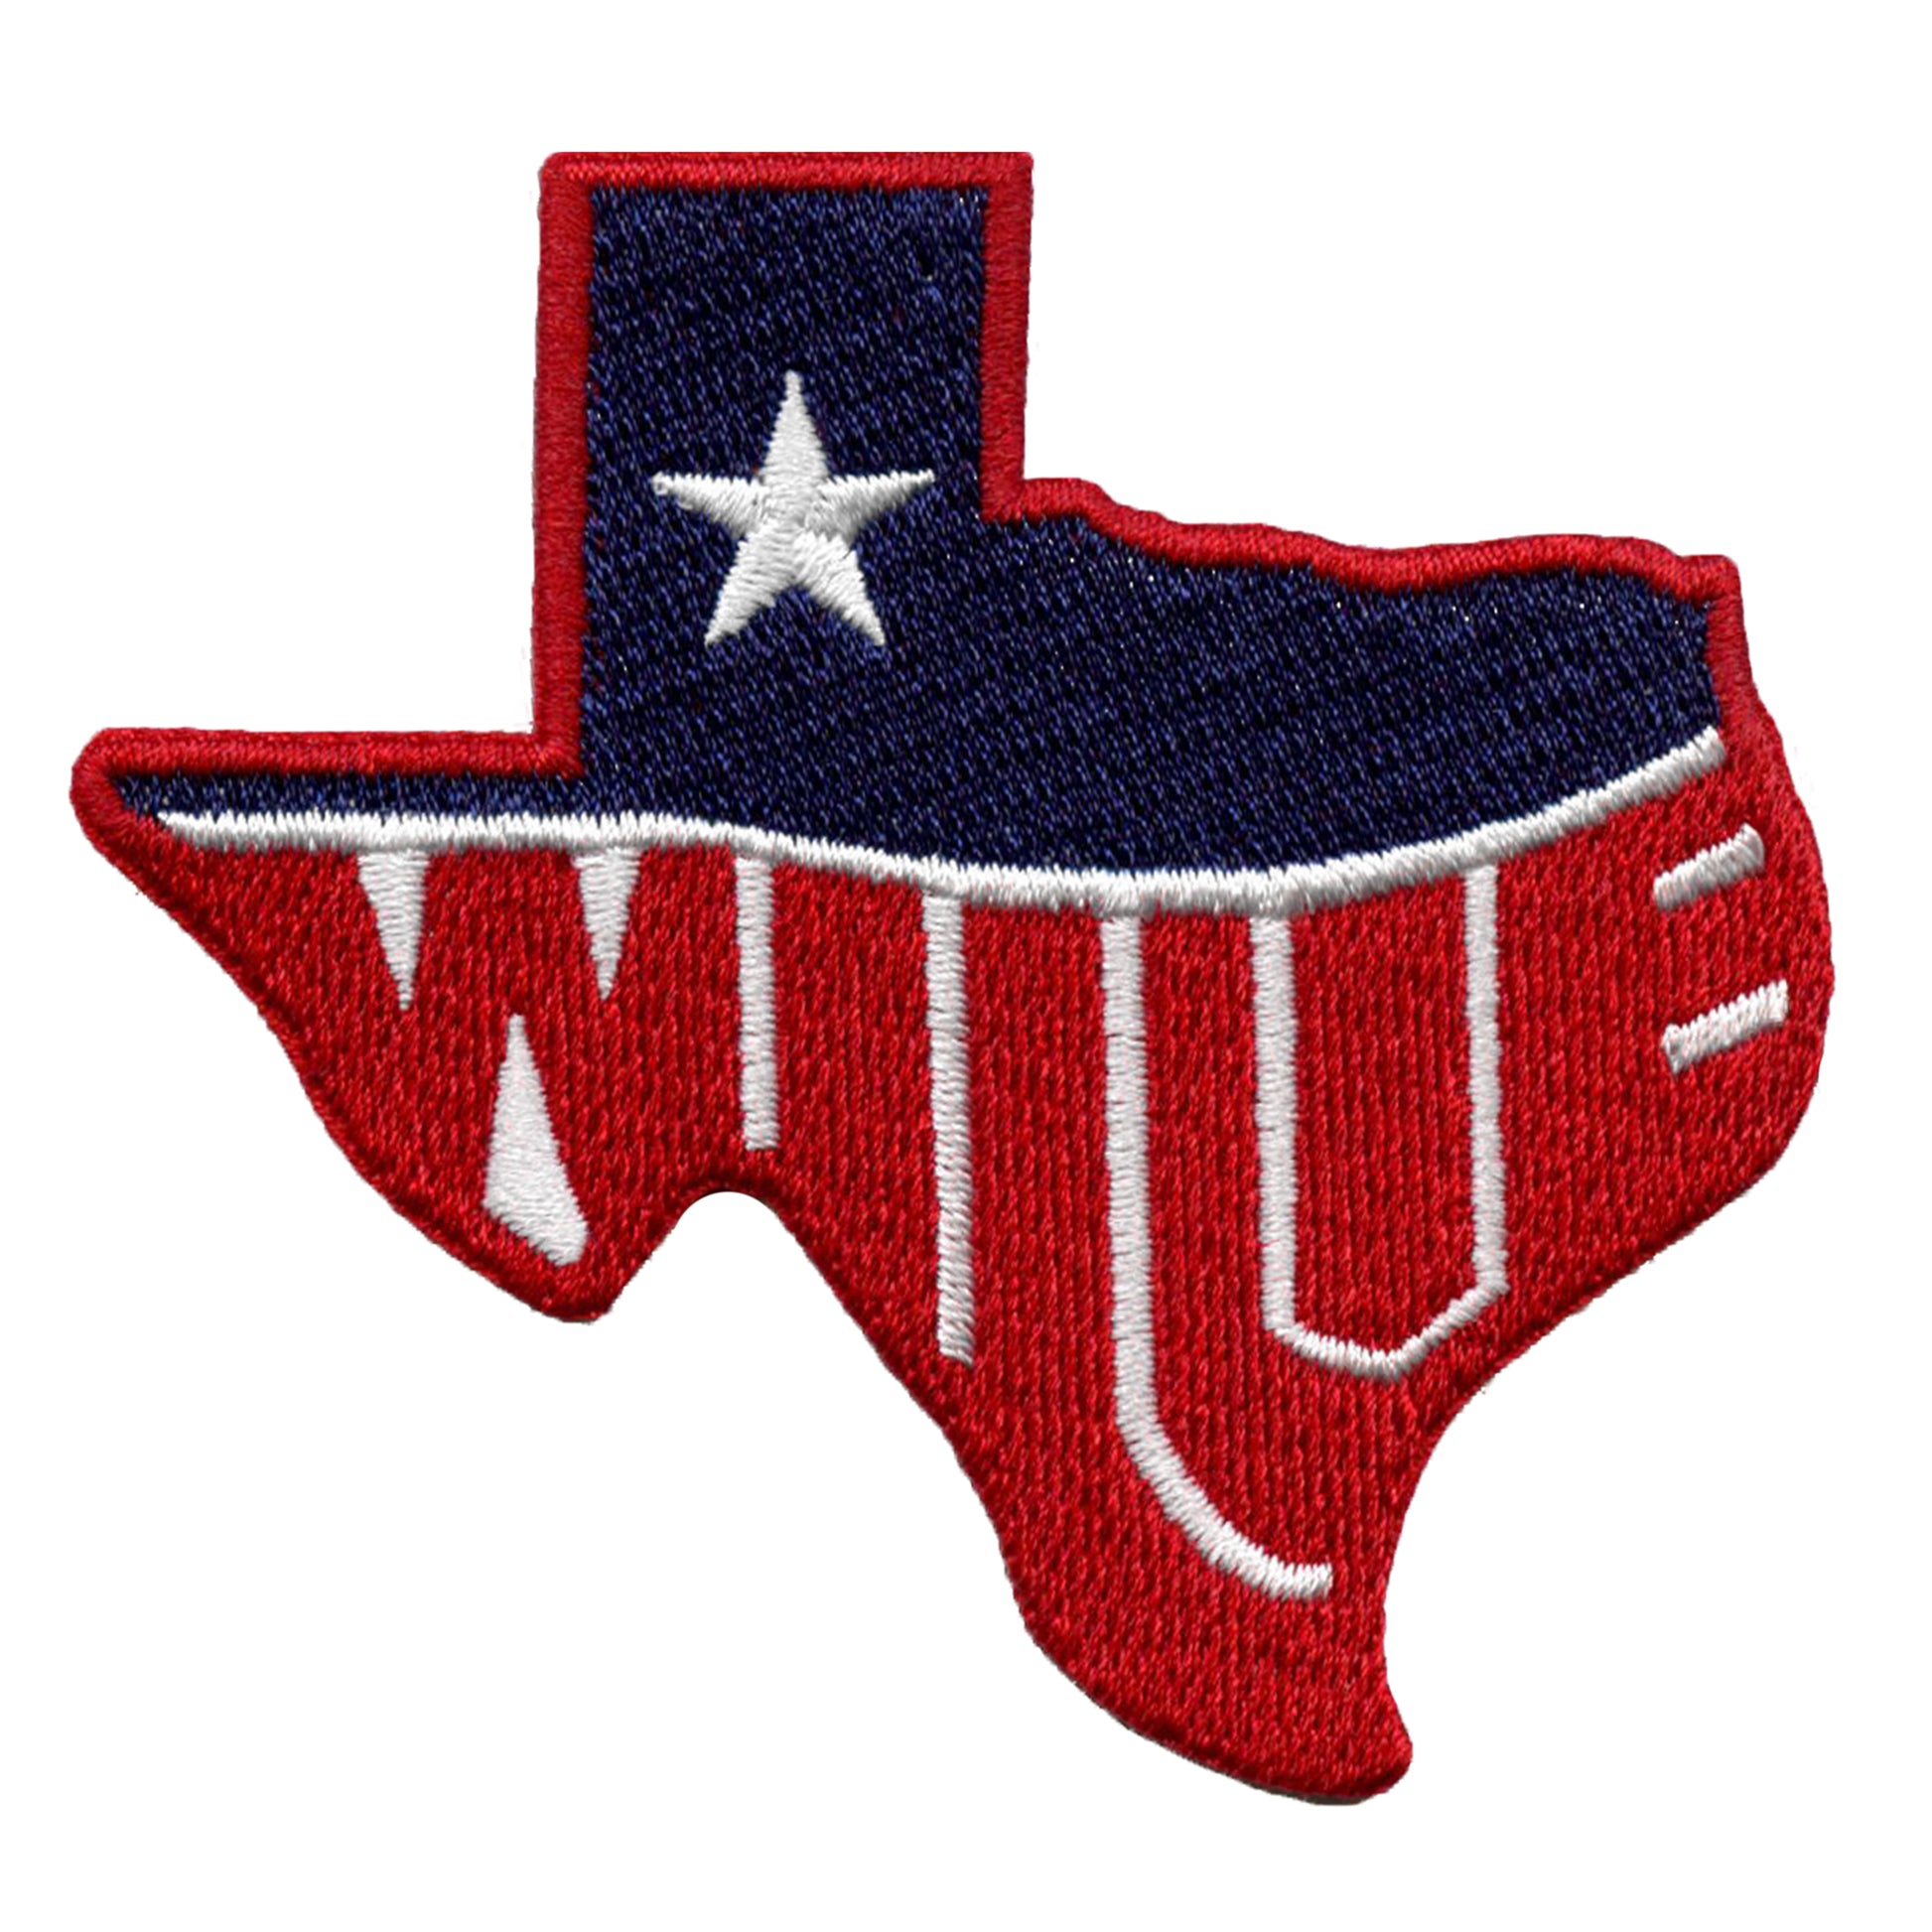 Willie Nelson Texas State Patch Iconic Country Musician Embroidered Iron On